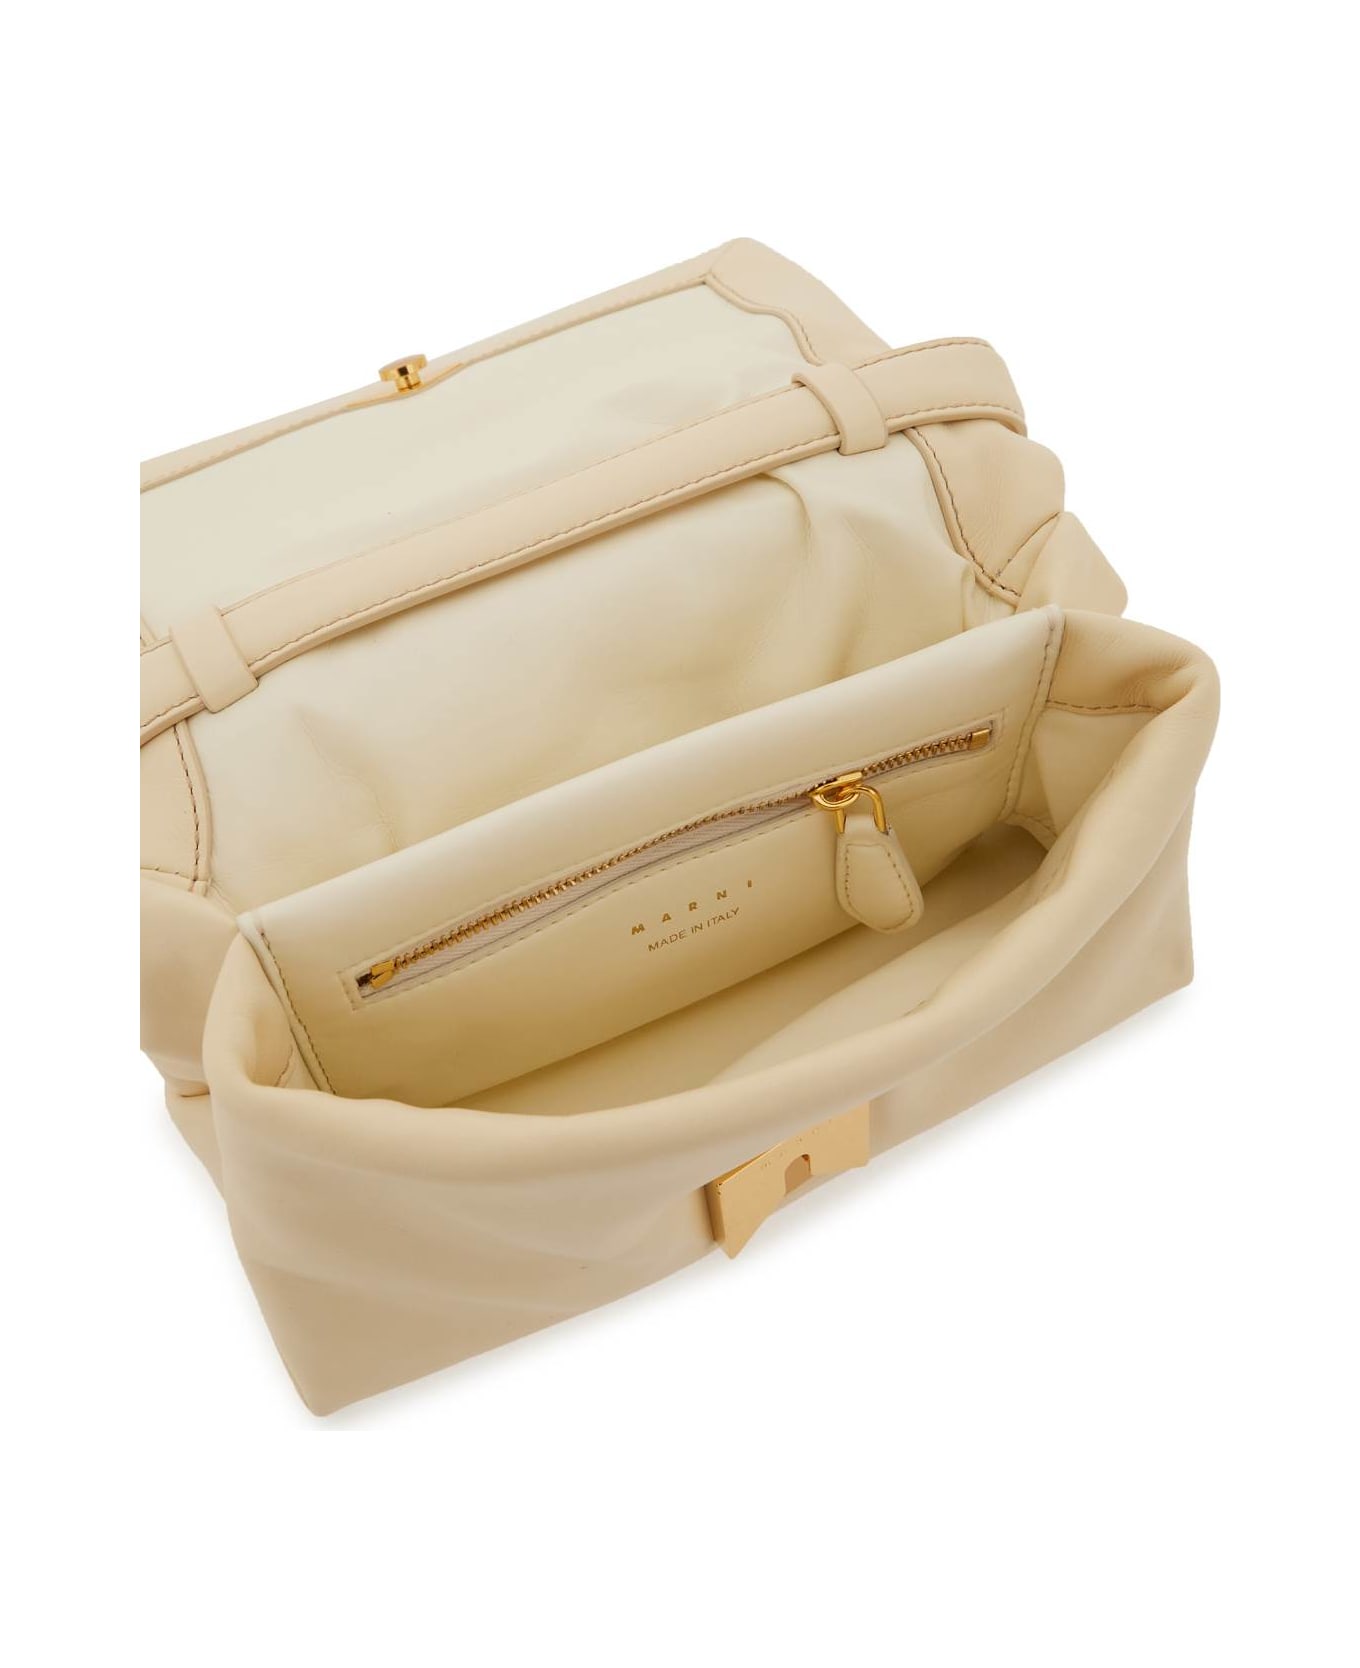 Marni Small Prisma Bag In Ivory Leather - IVORY トートバッグ